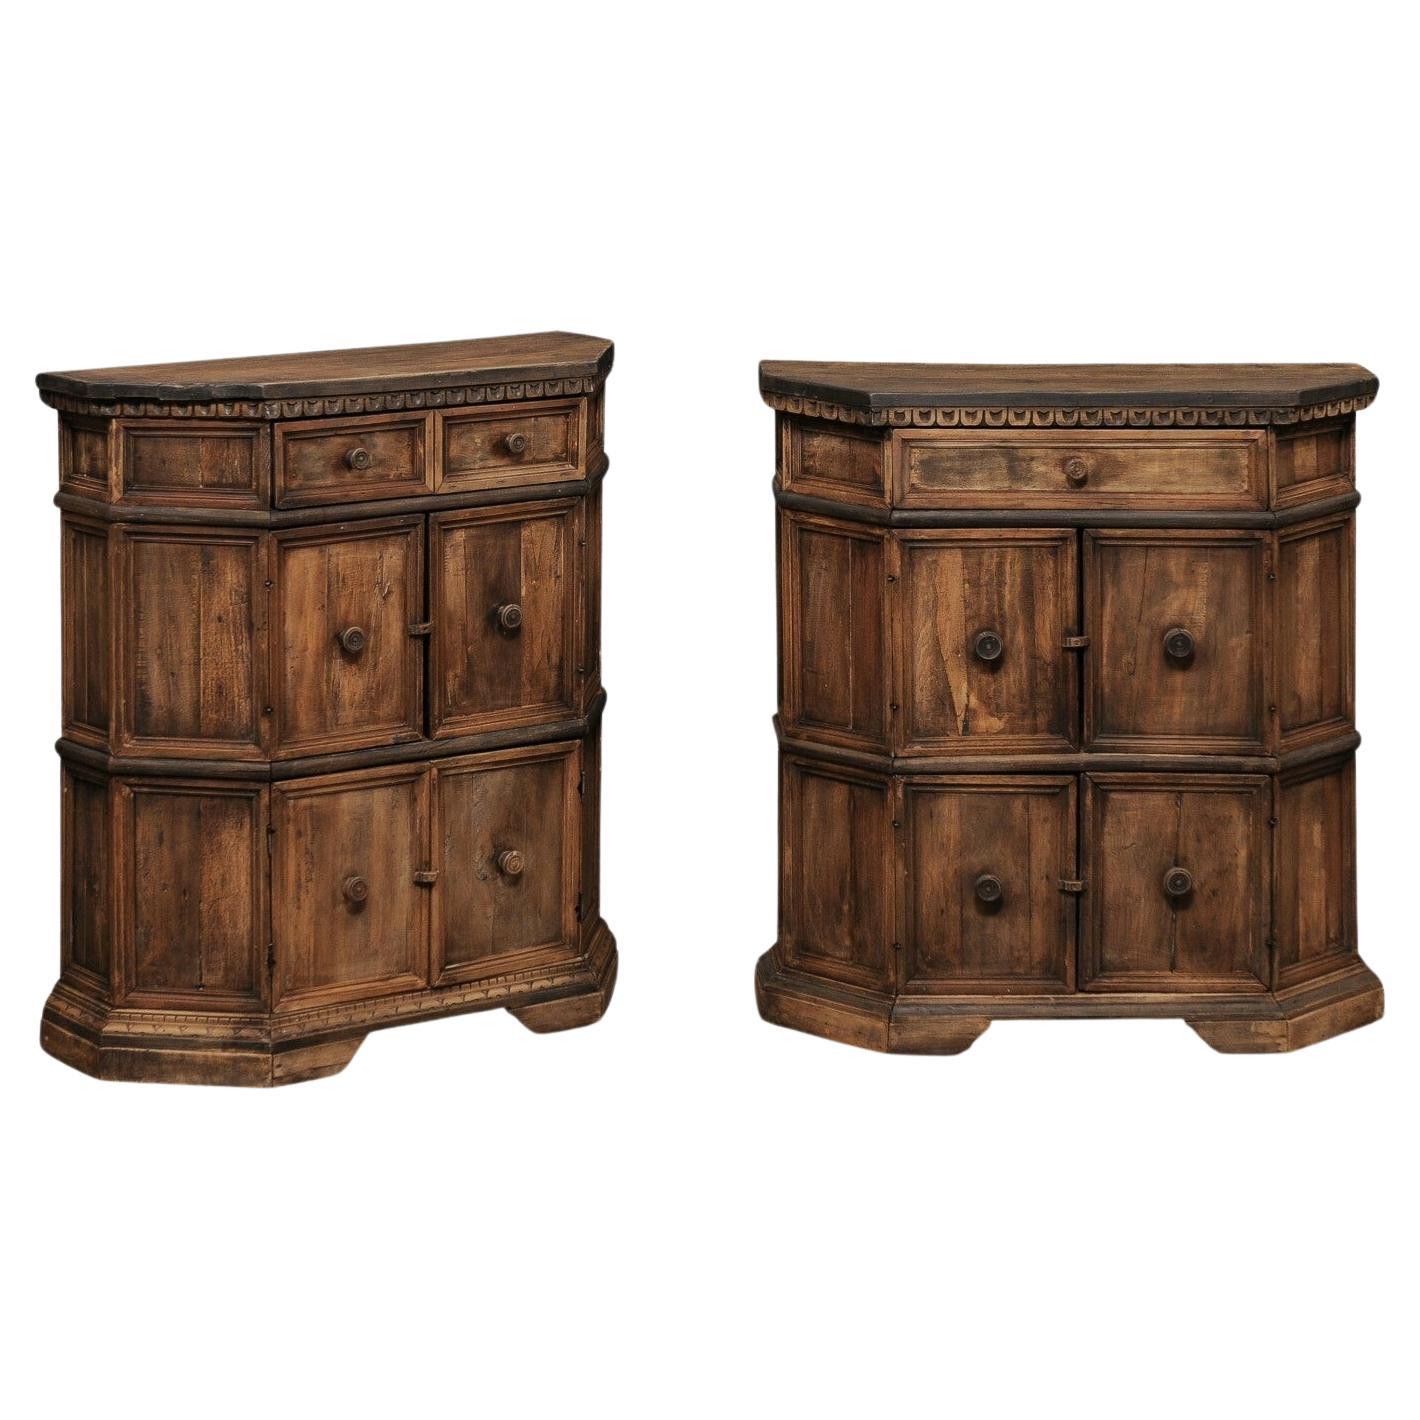 Petite Pair Italian Wooden Console Cabinets w/Egg n Dart Trim & Recessed Panels